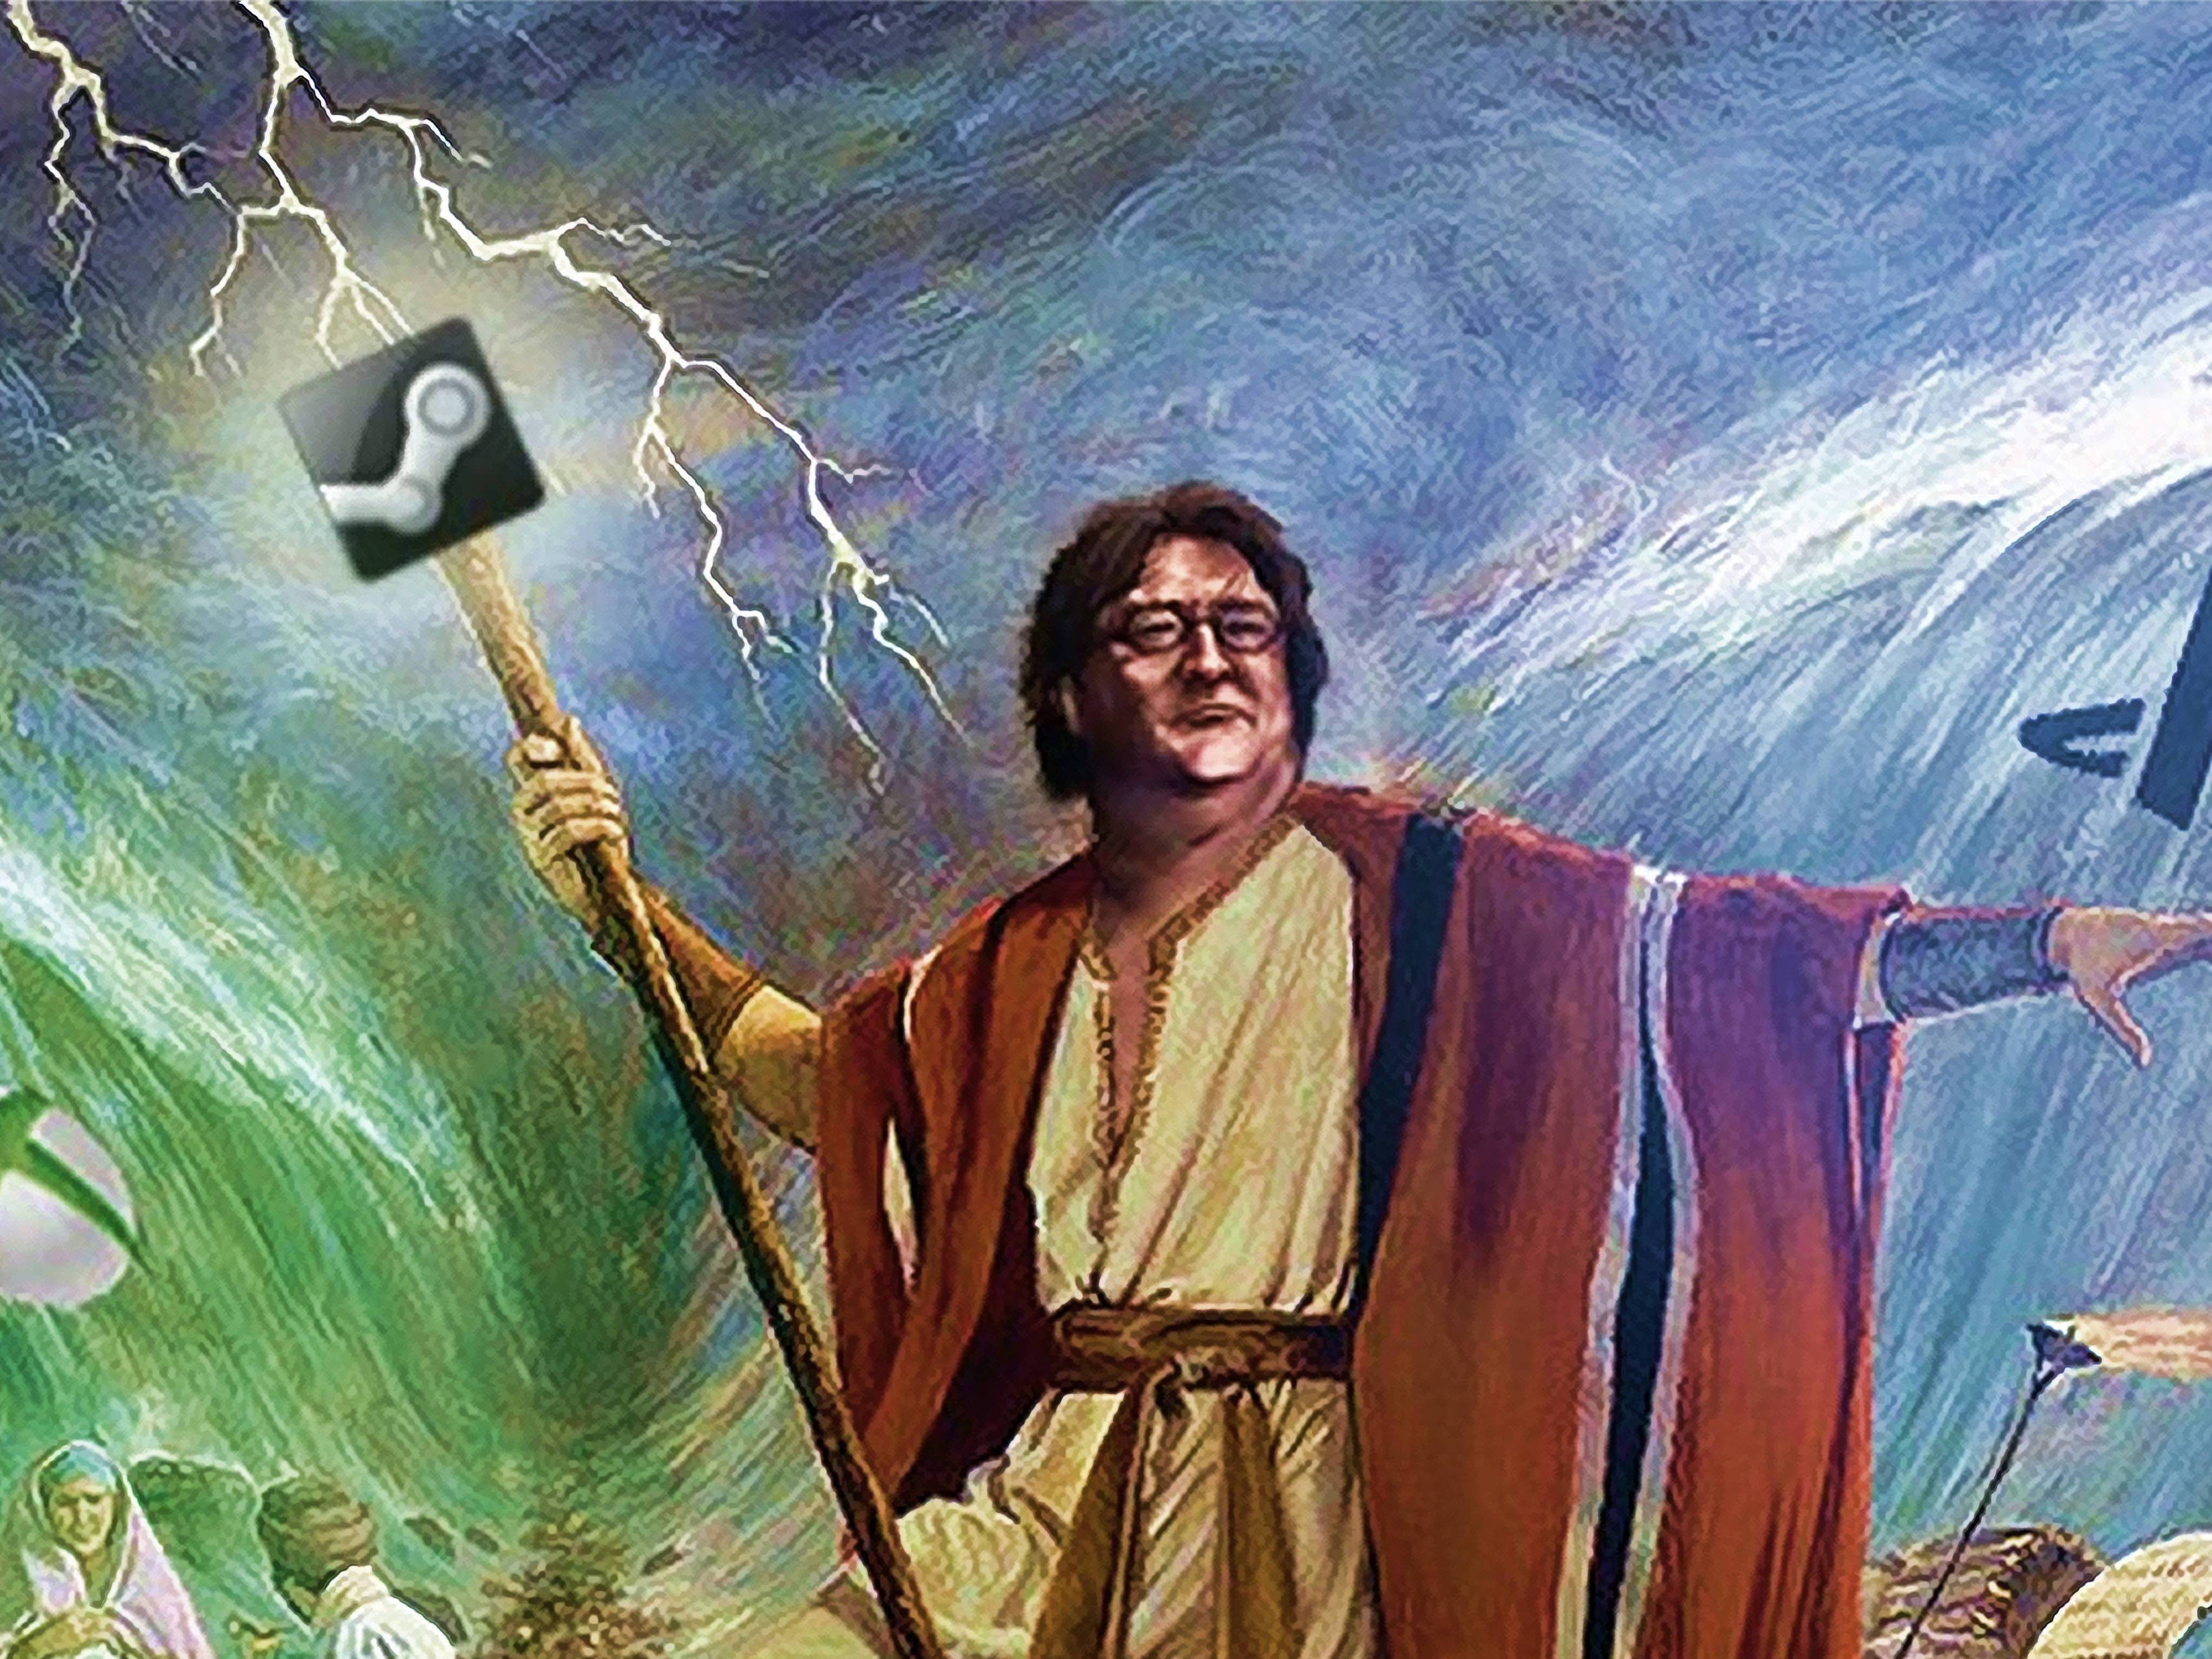 Gabe Newell, PC Gaming, PC Master Race, Steam (software), Valve